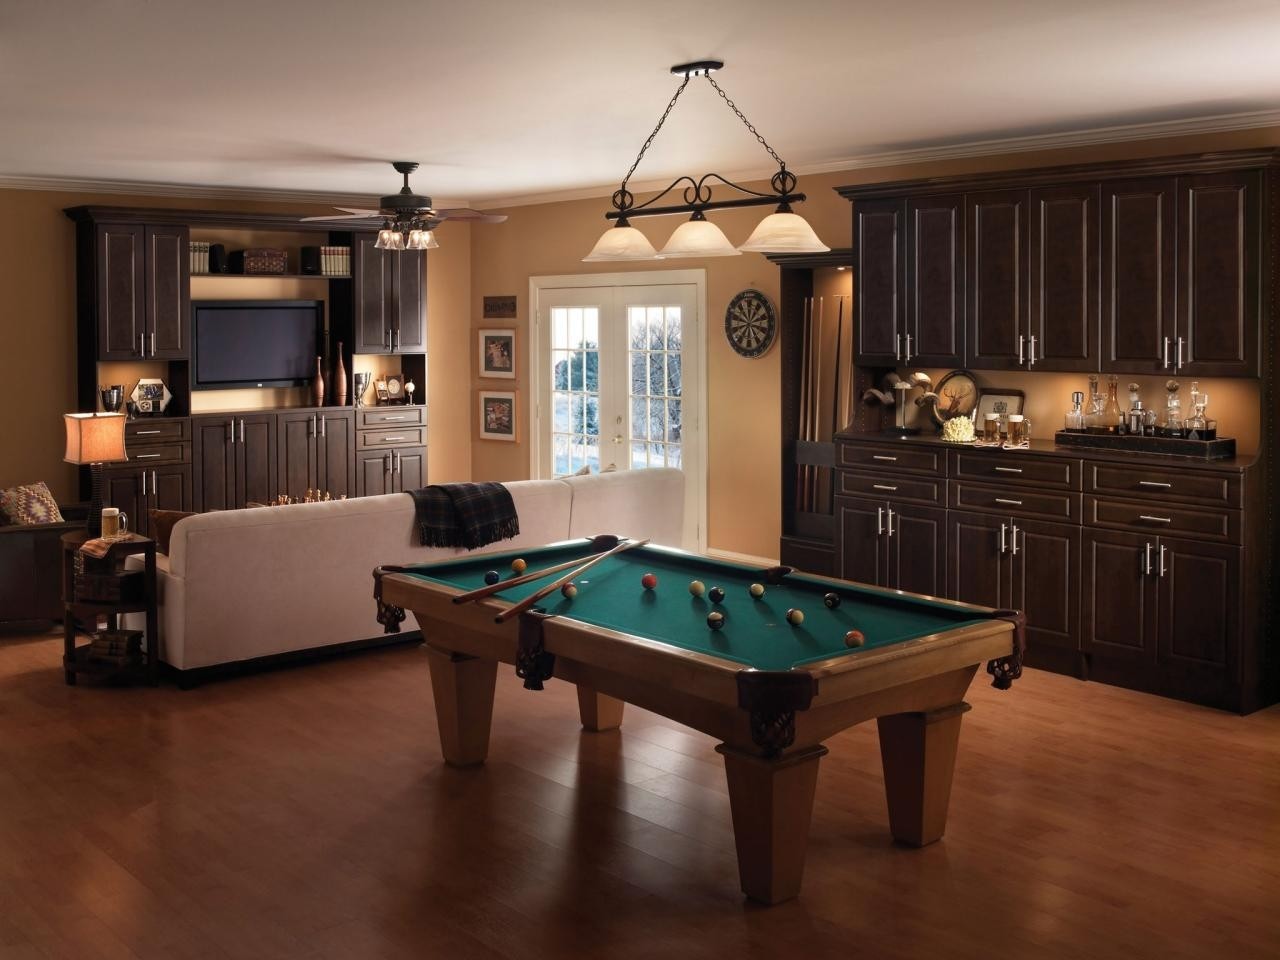 Game room design game room ideas gallery decorating